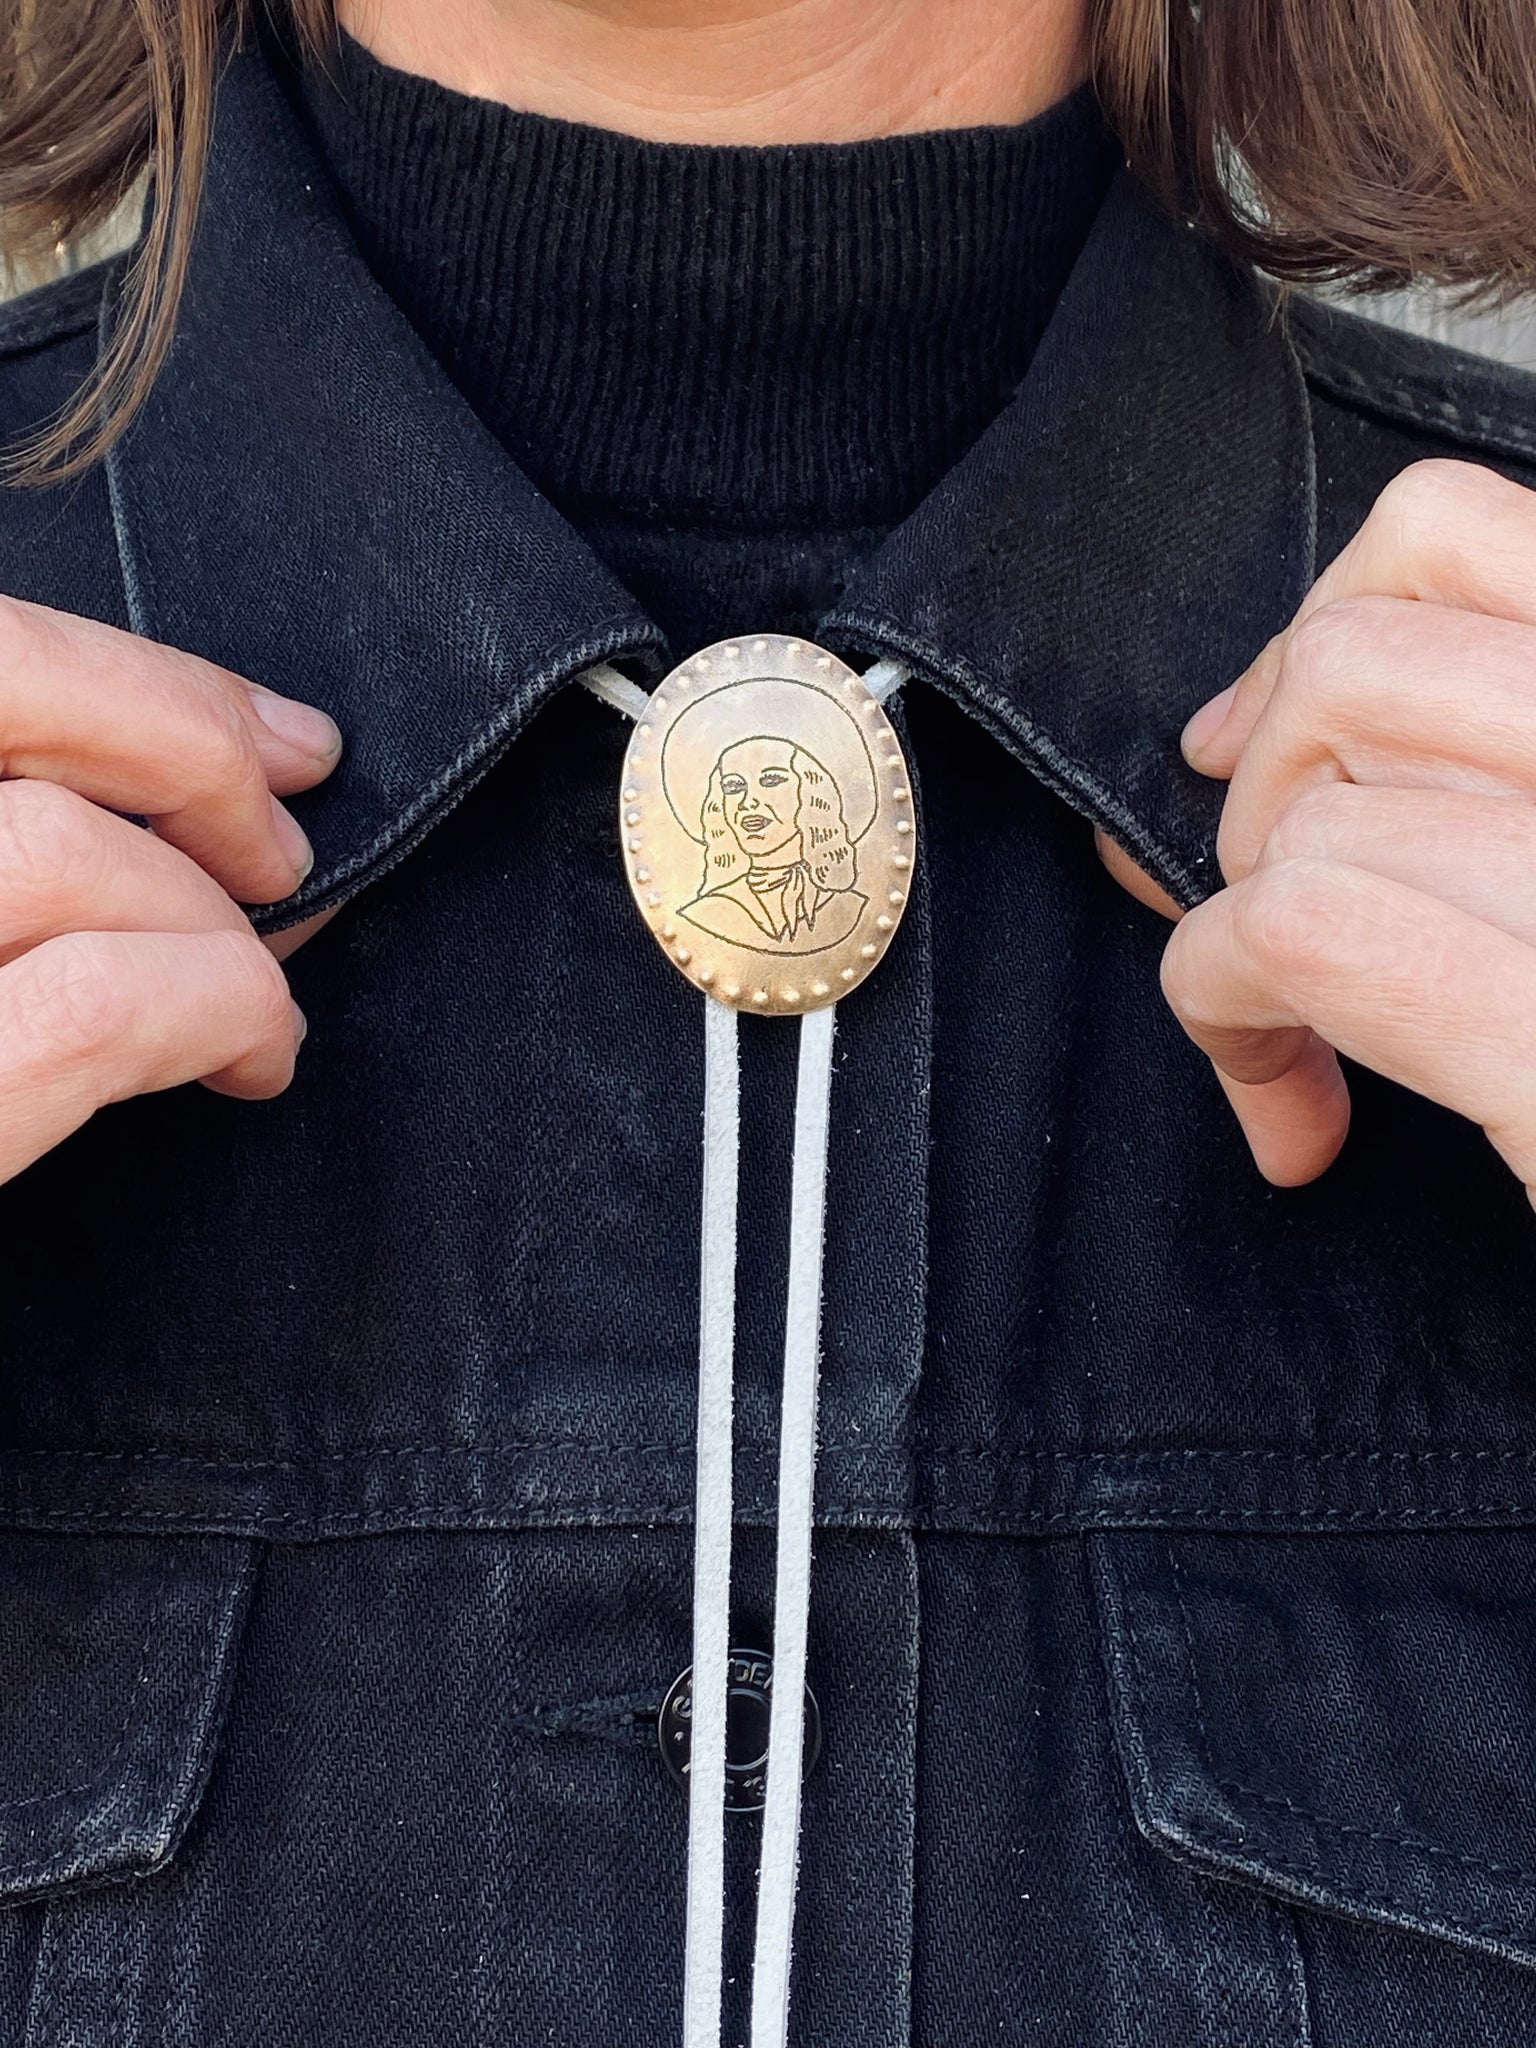 Claire Sommers Buck x Fort Lonesome Cowgirl Bolo Tie